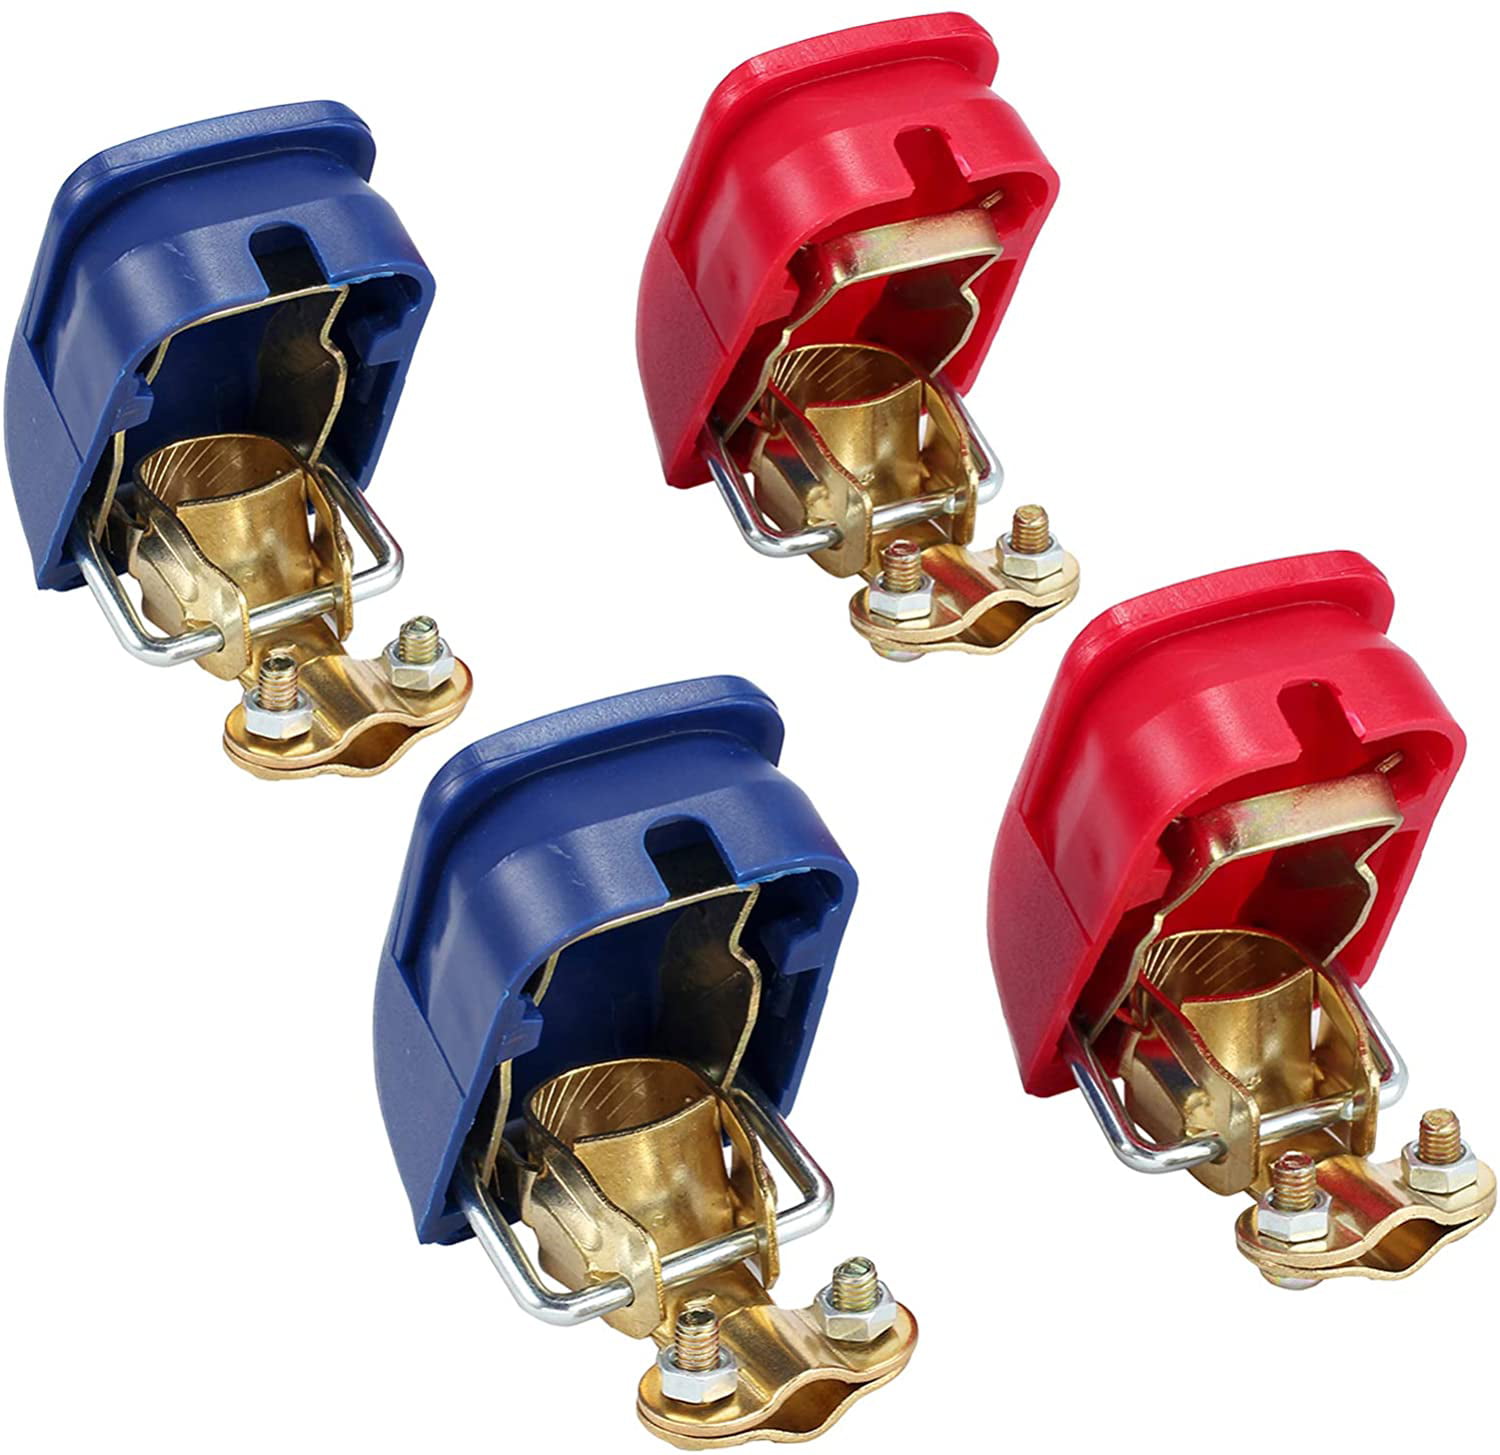 Quick Release Battery Terminals Clamps Connectors for Car Caravan Motorhome Terminal 2 Pairs of Positive and Negative Quick release car battery connectors Red/Blue 